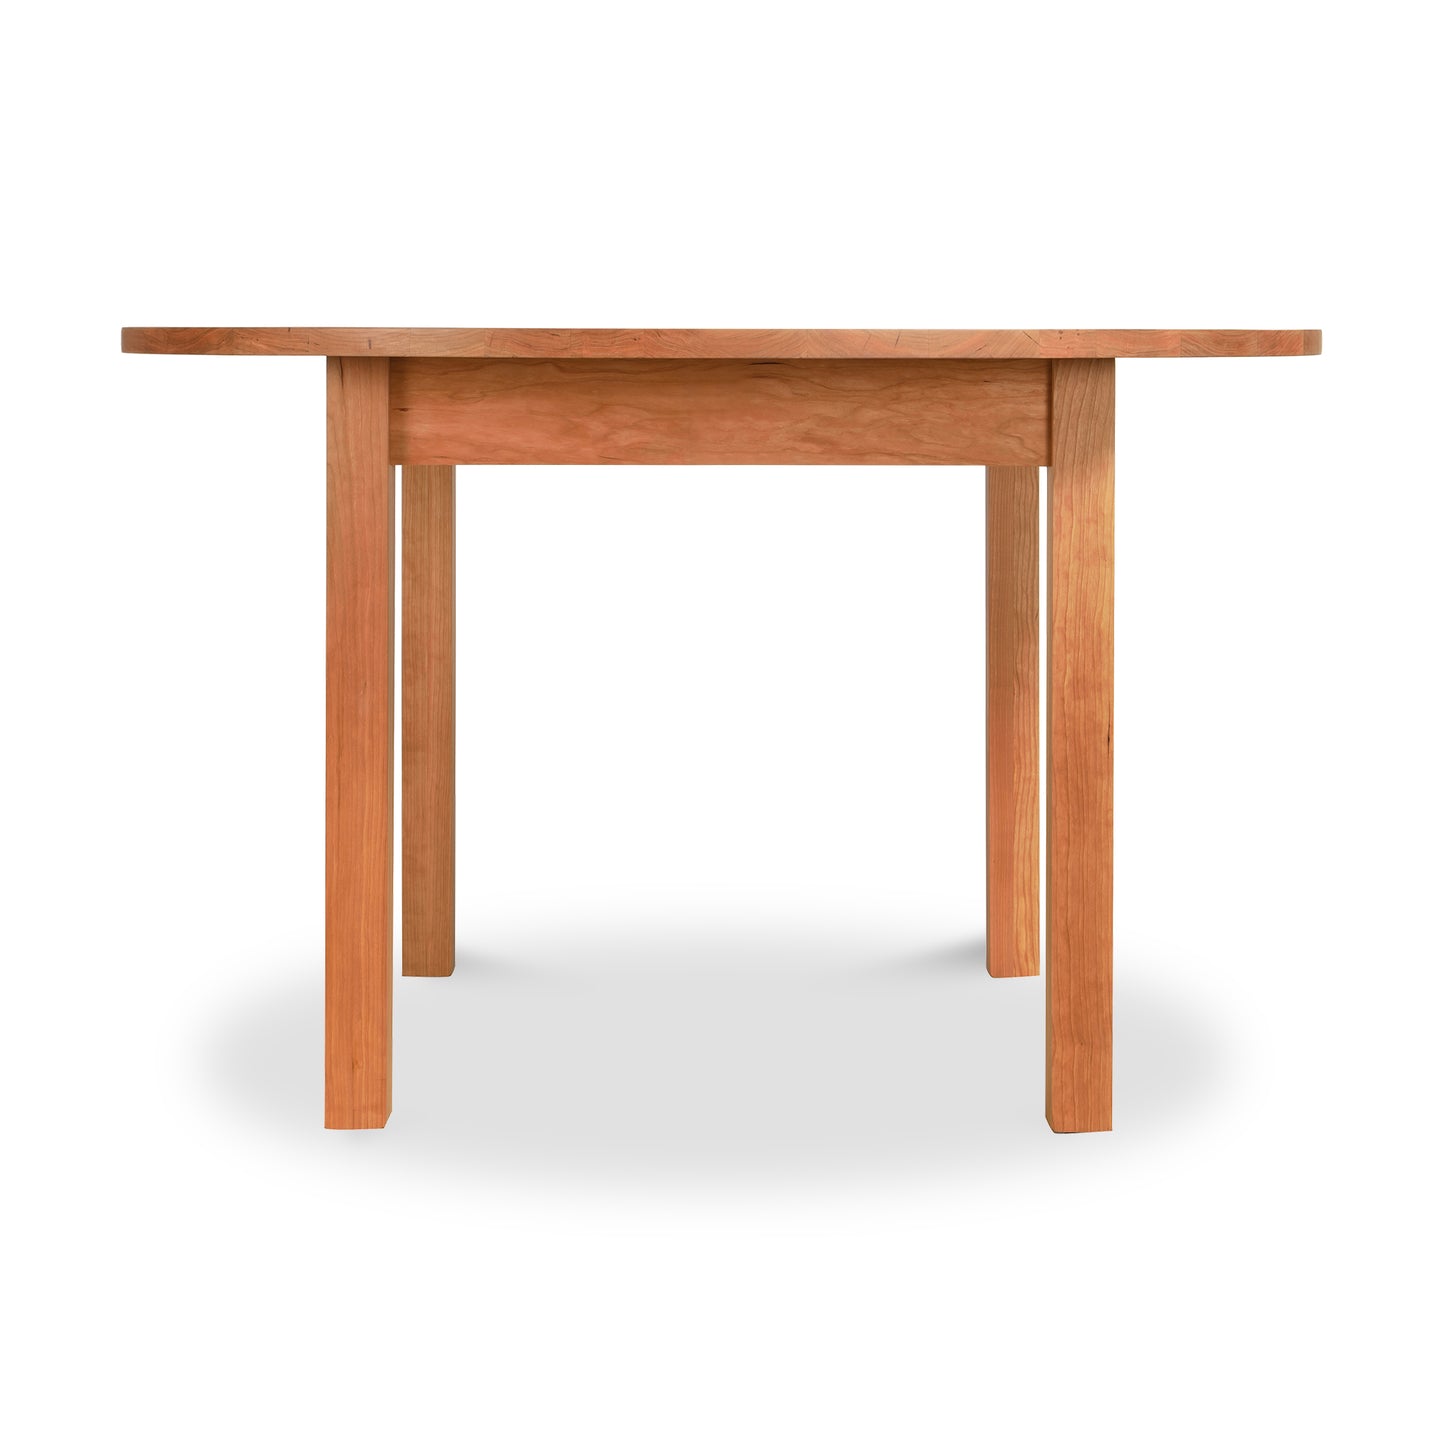 A simple Vermont Furniture Designs Burlington Shaker Round Solid Top Dining Table isolated on a white background.